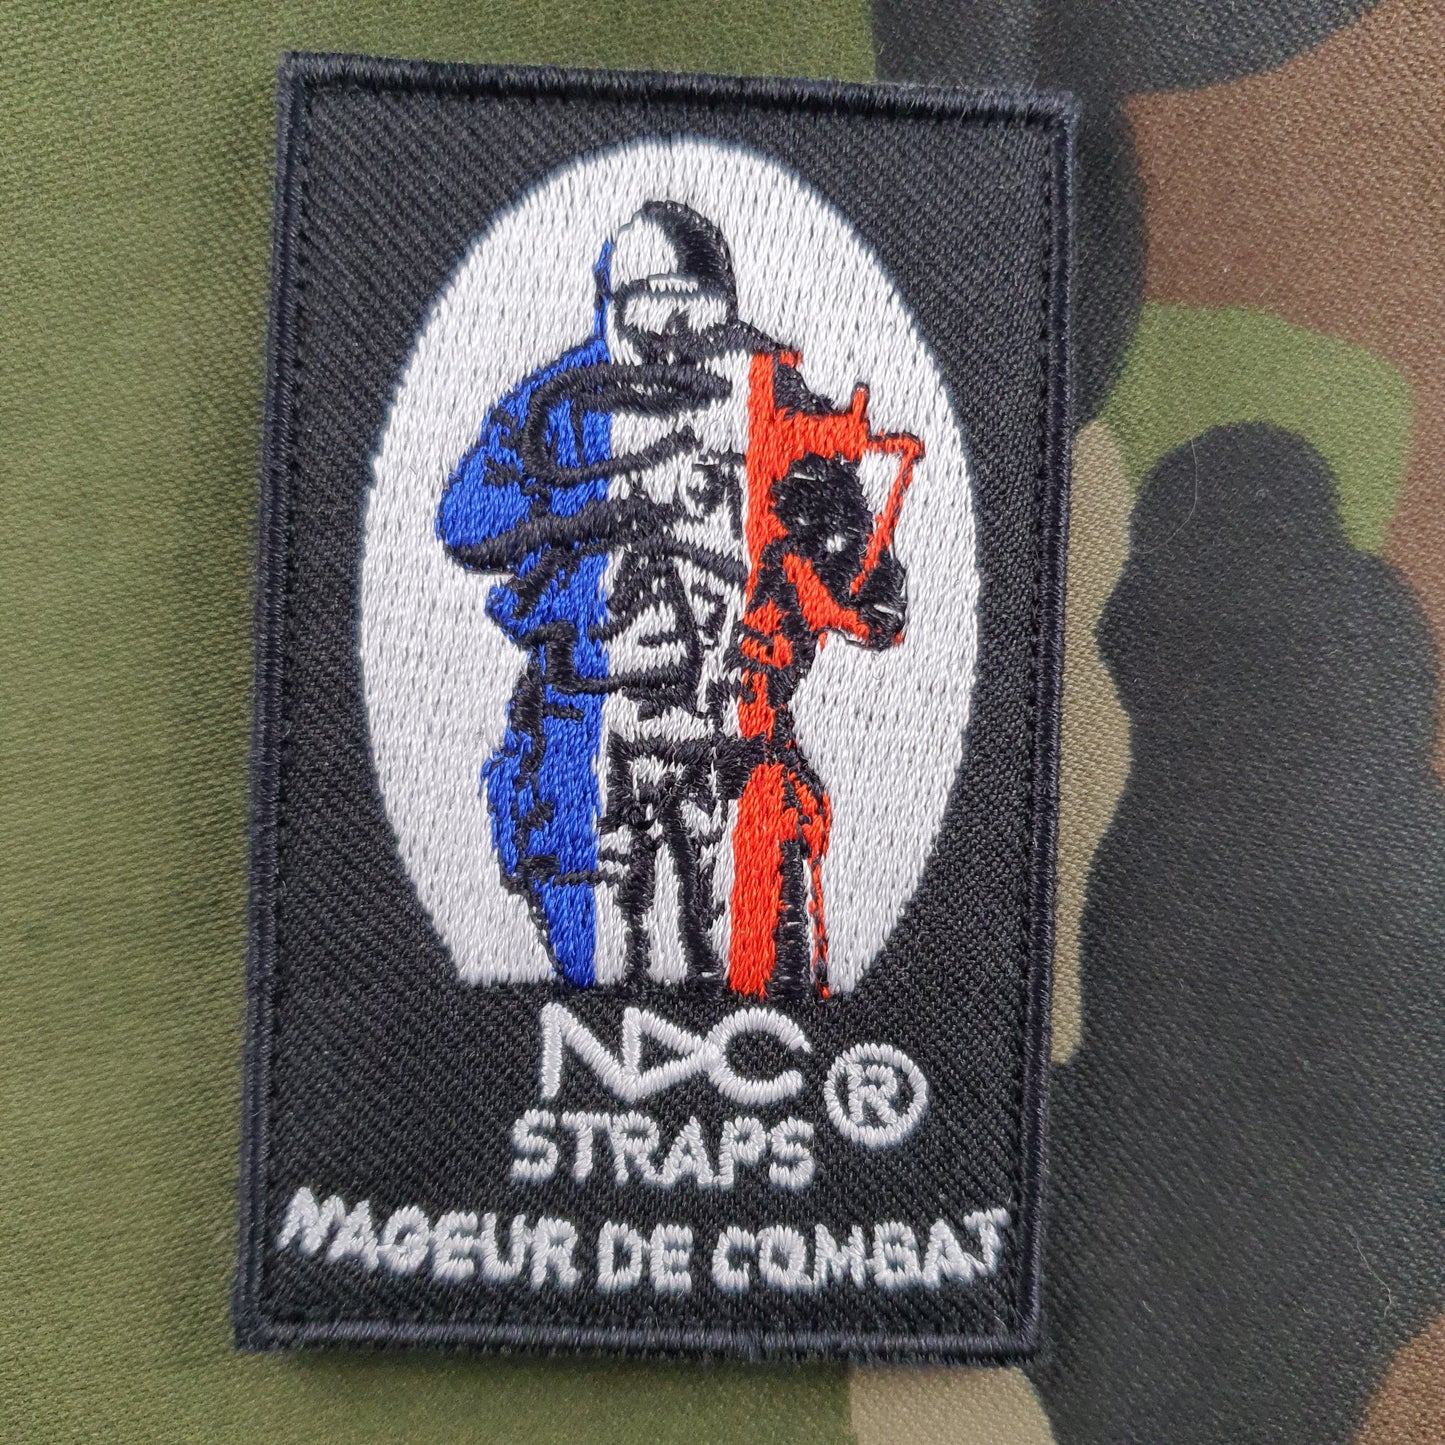 NDC Rectangle diver patch - NDC Straps